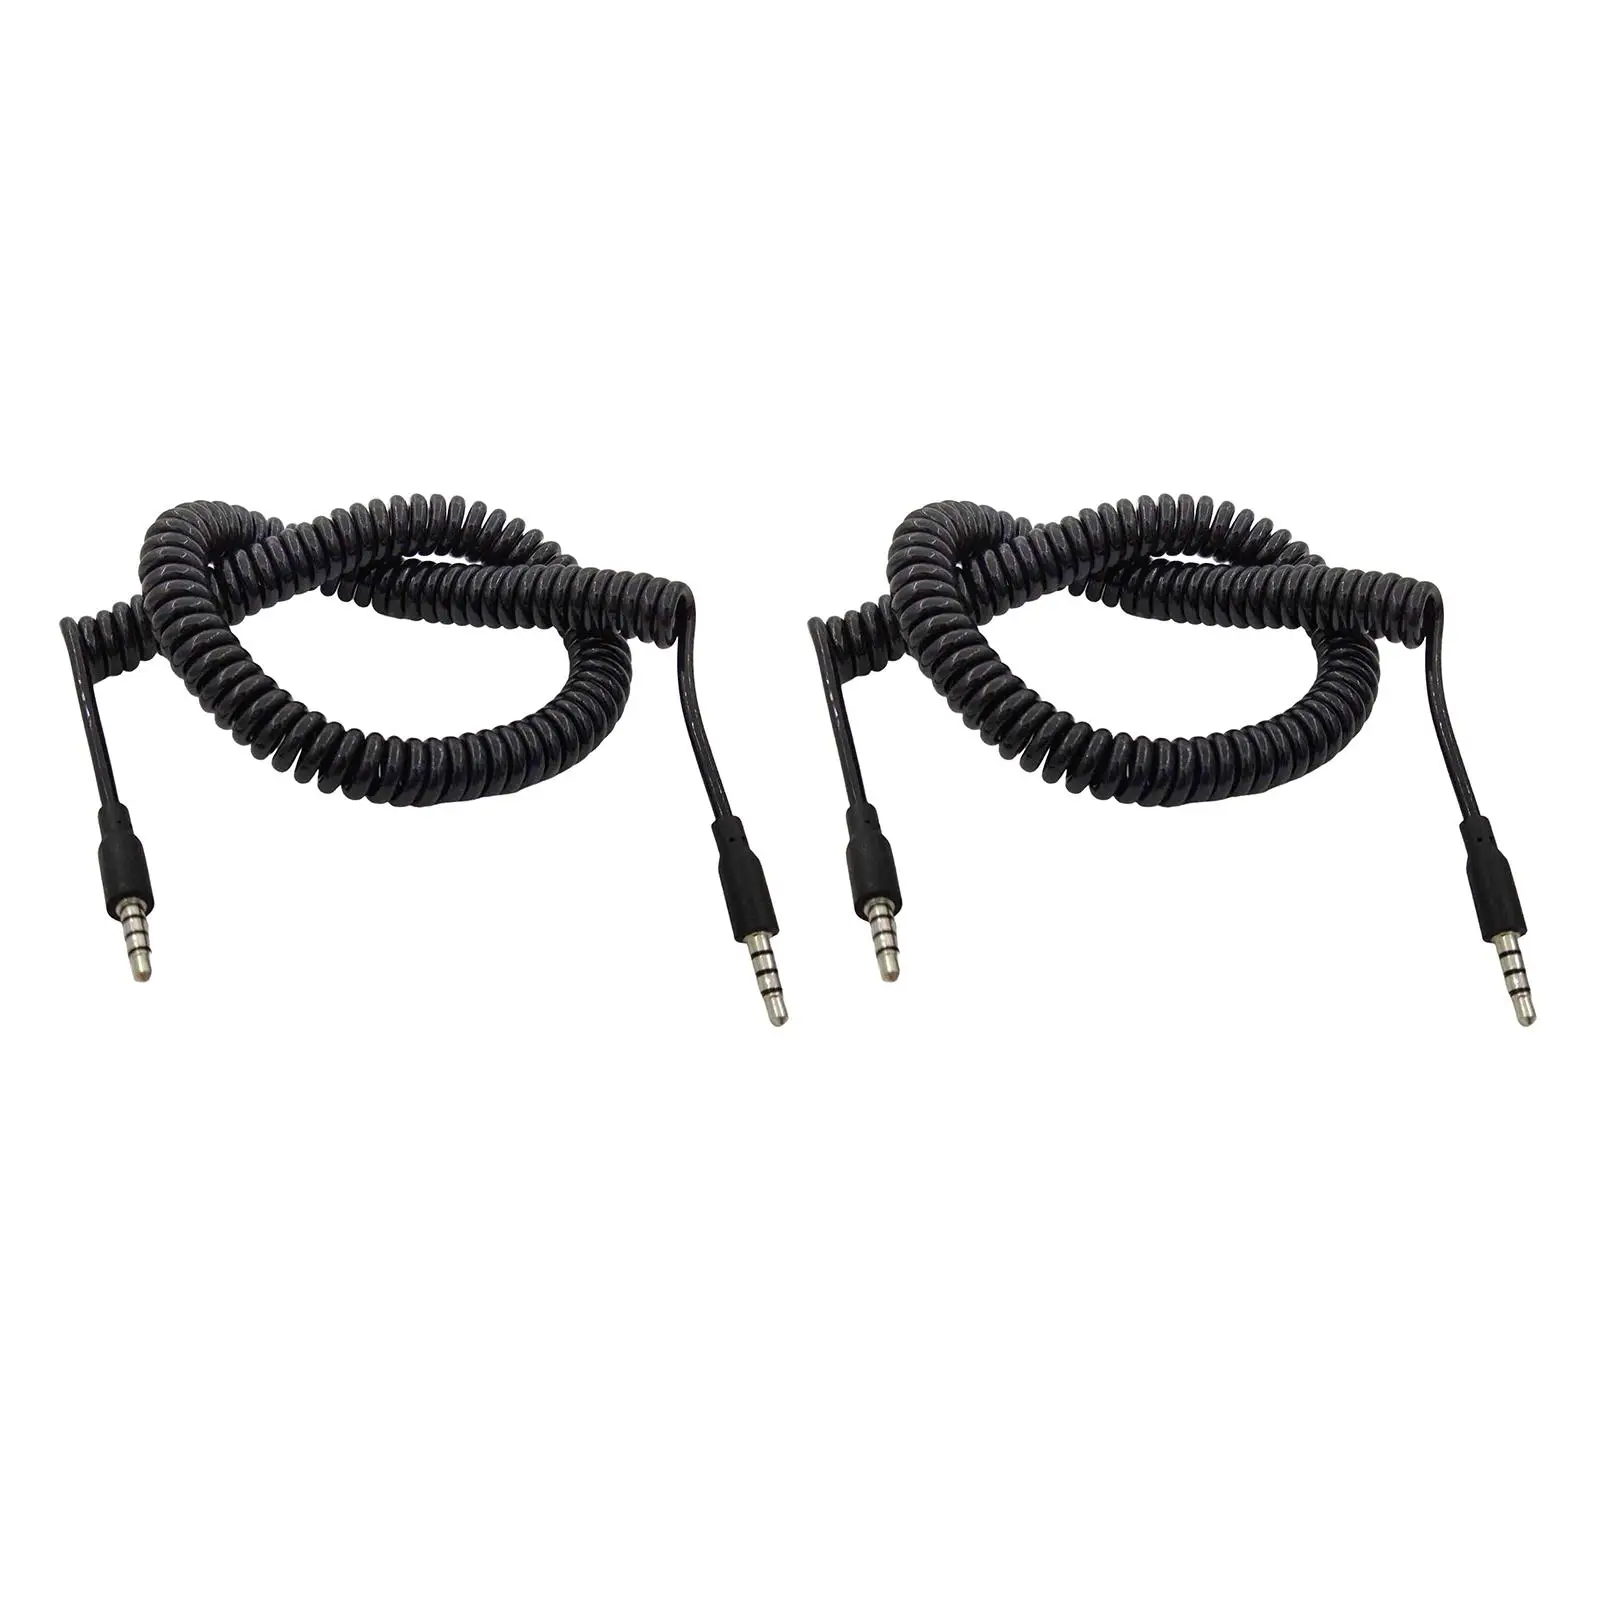 Audio Spiral Cable Nickel Plated for tablet Radios Computers